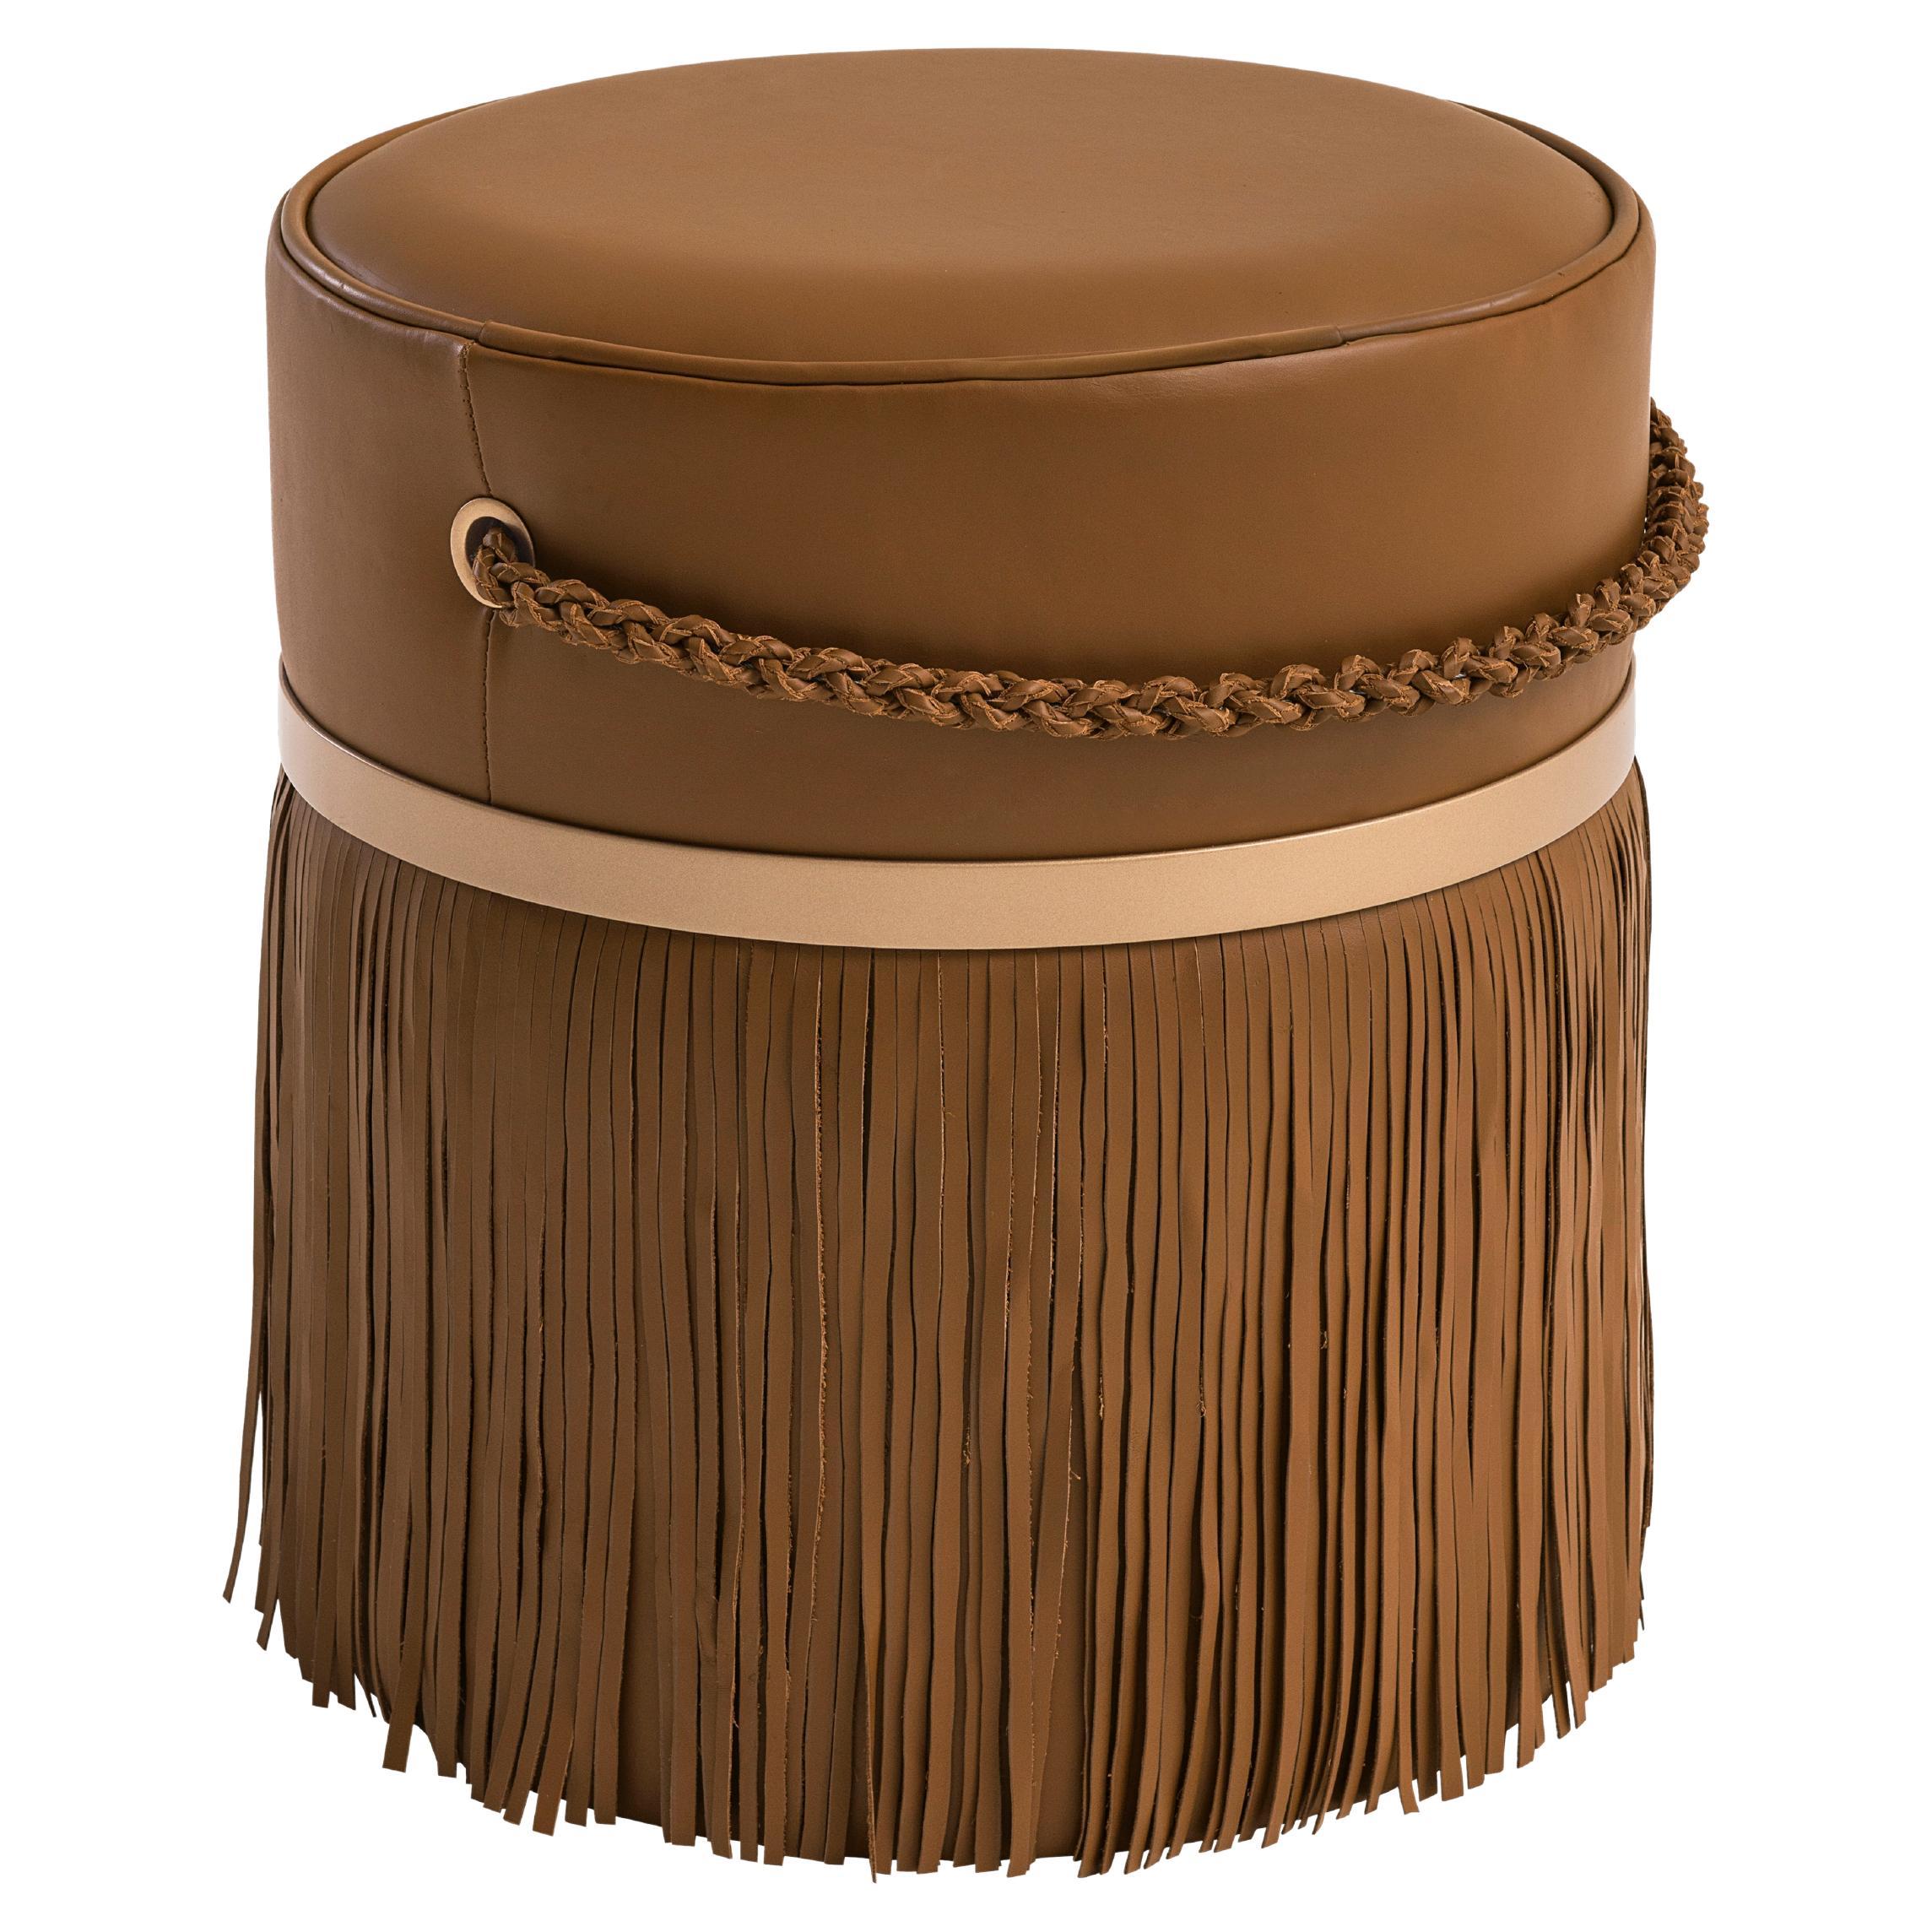 "Revoar" Fringes Ottoman with Chain Handle in Natural Leather and Golden Details For Sale